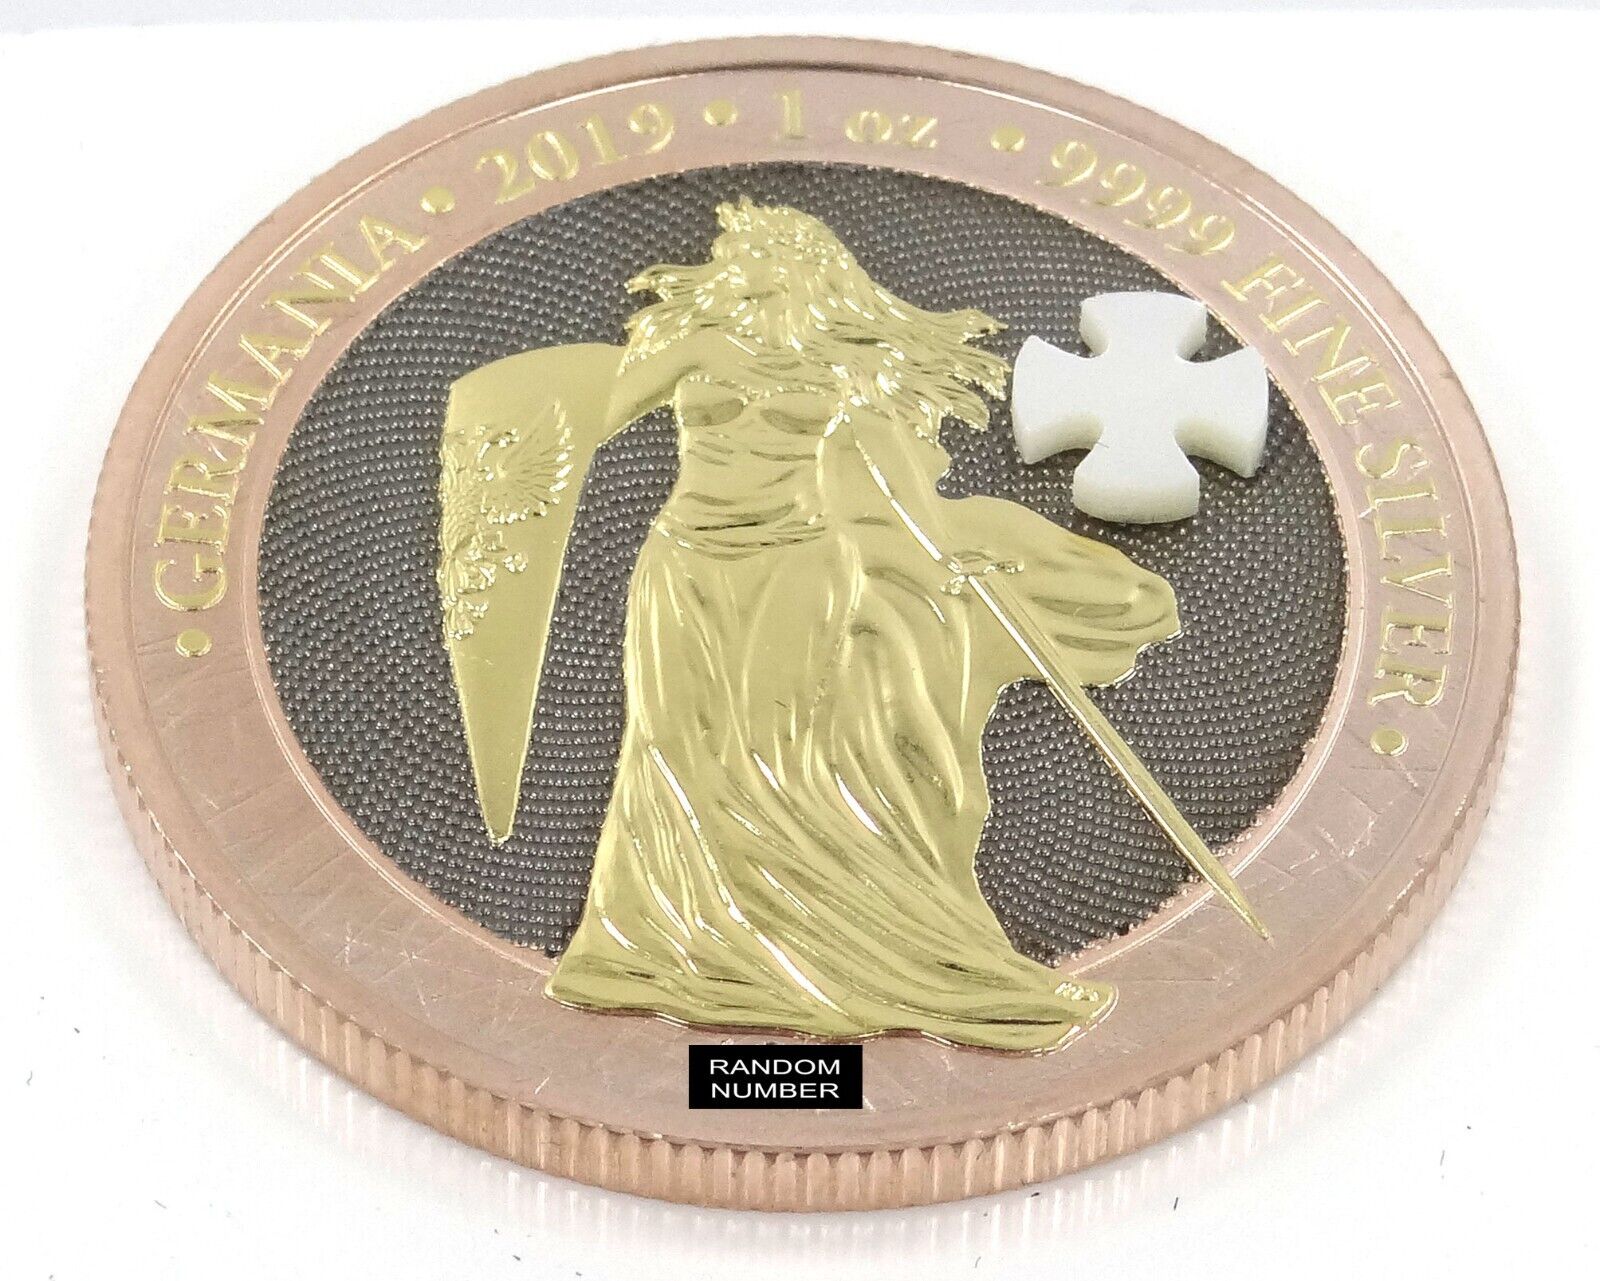 1 Oz Silver Coin 2019 5 Mark Germania - Rose Gold Mother of Pearl Cross-classypw.com-1